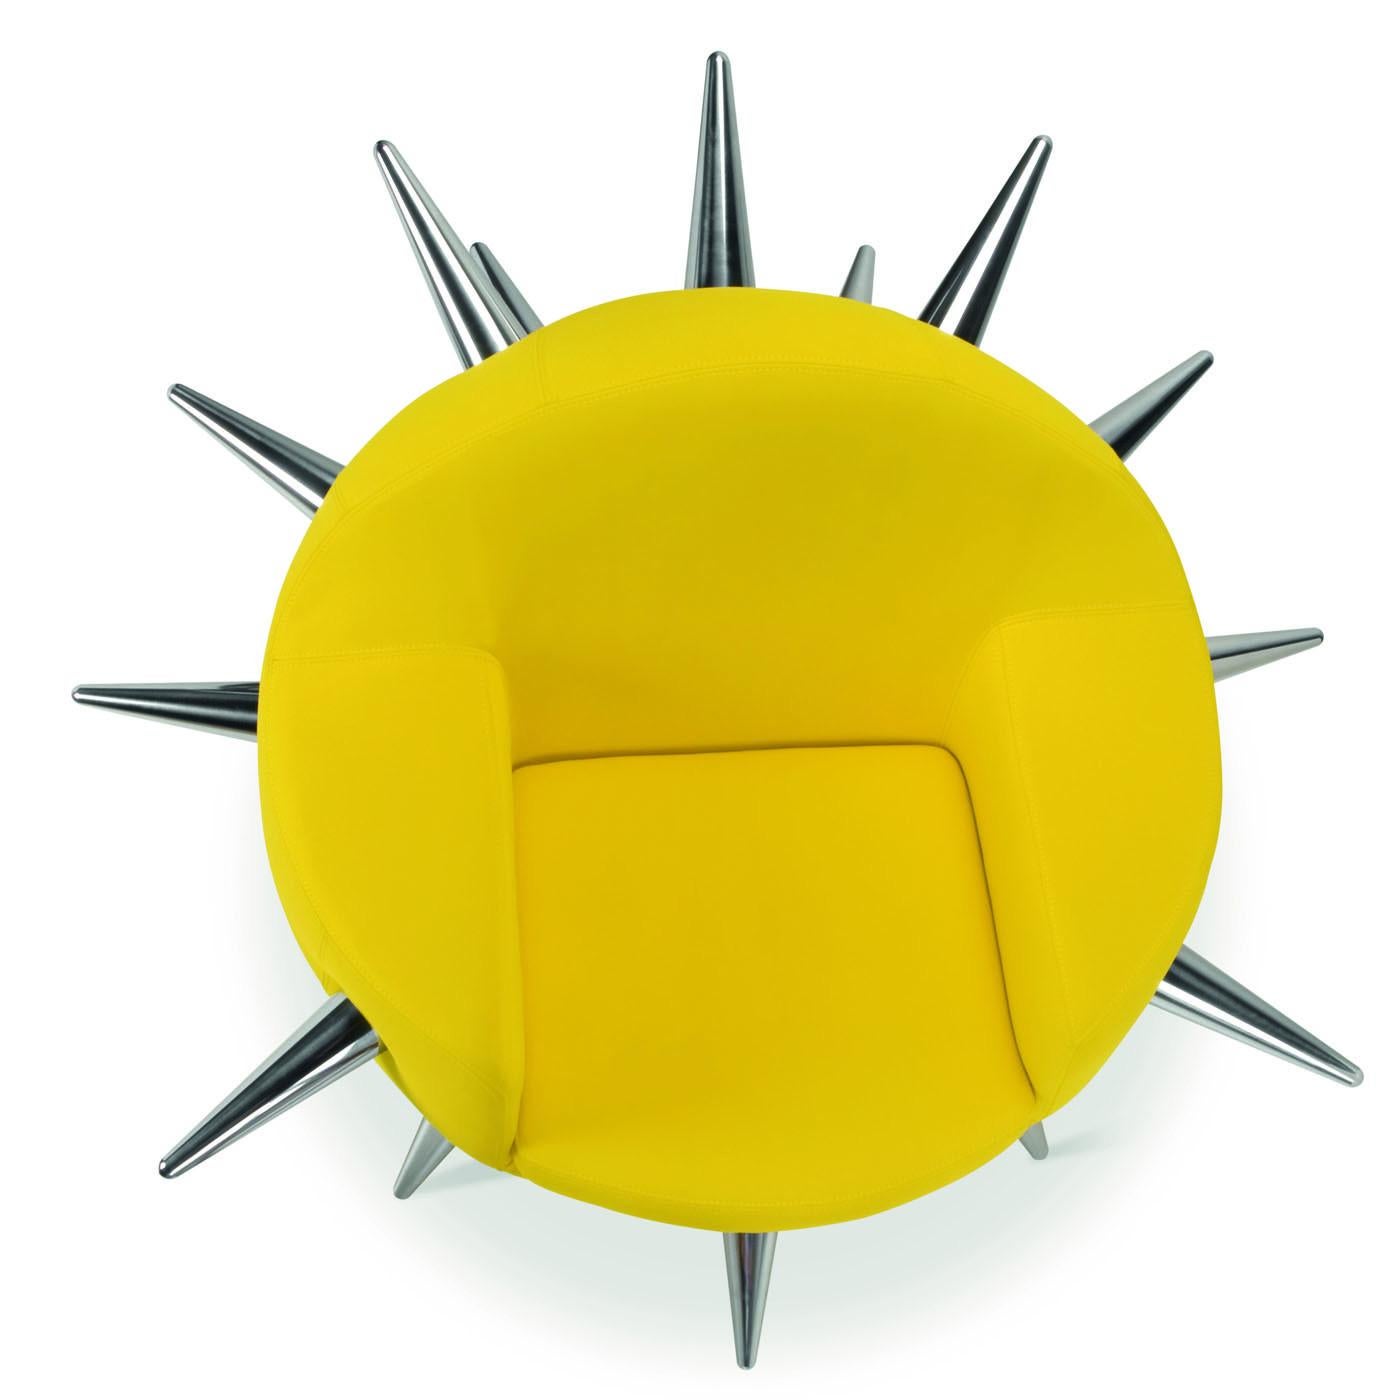 Designed by Simone Micheli, Bomb is inspired by an object of destruction to invite to reflect on the drama of war and the hope that life will always prevail. The armchair is a designer piece, featuring rounded shape with tips in polished aluminum.